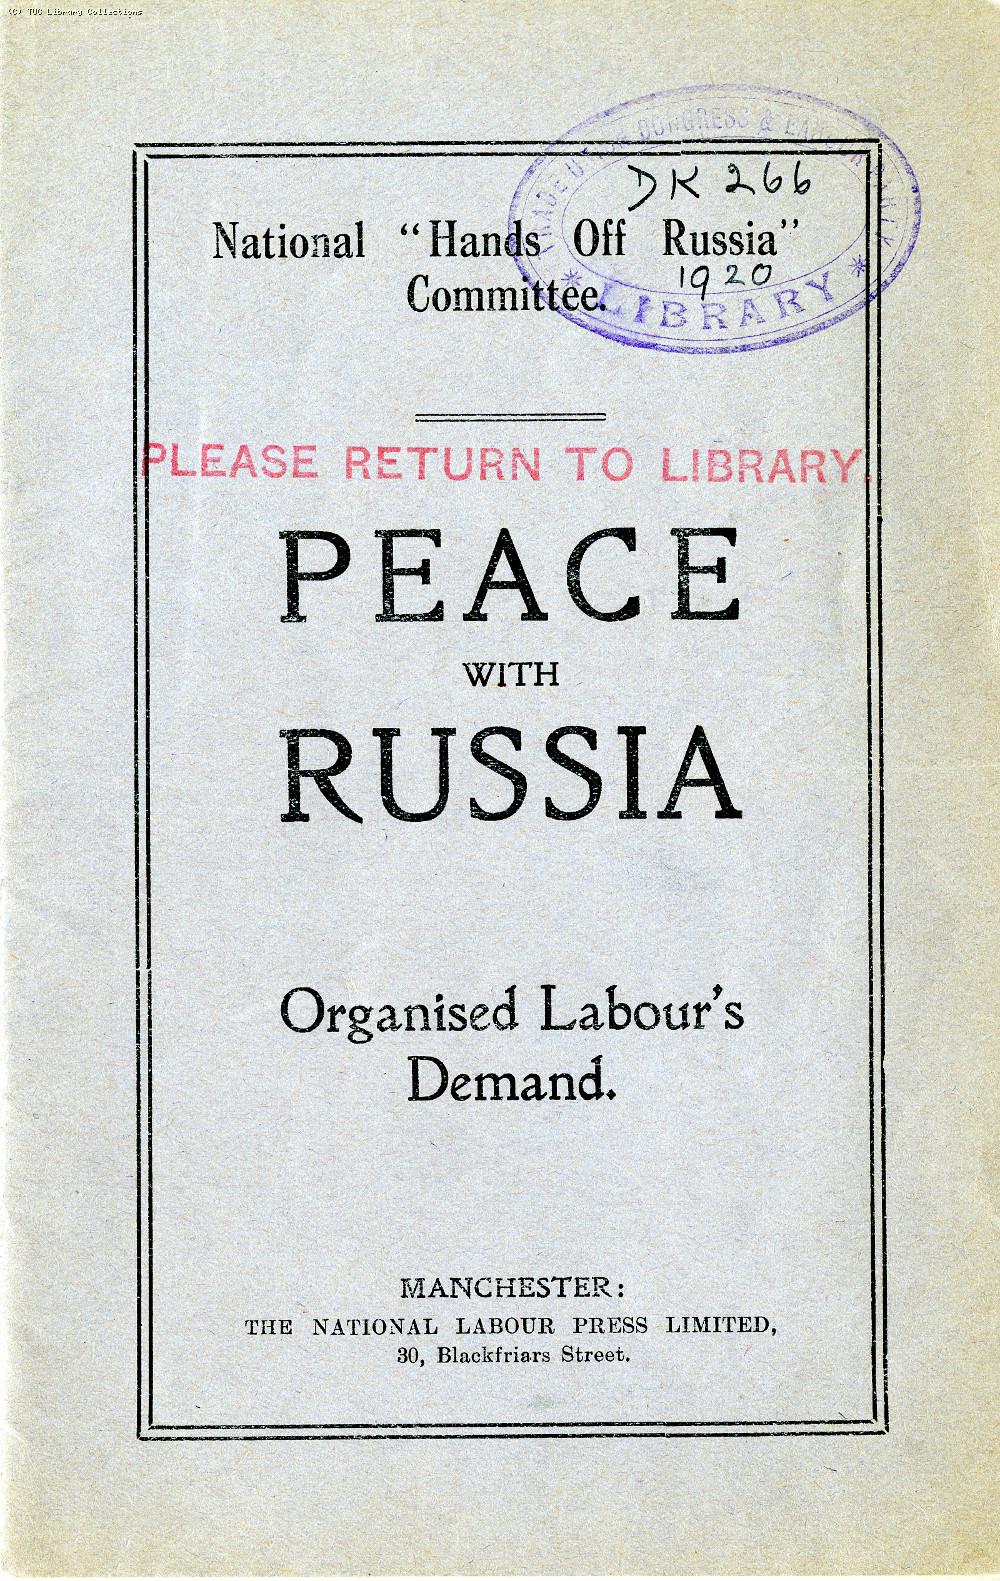 National Hands Off Russia Committee, 1920